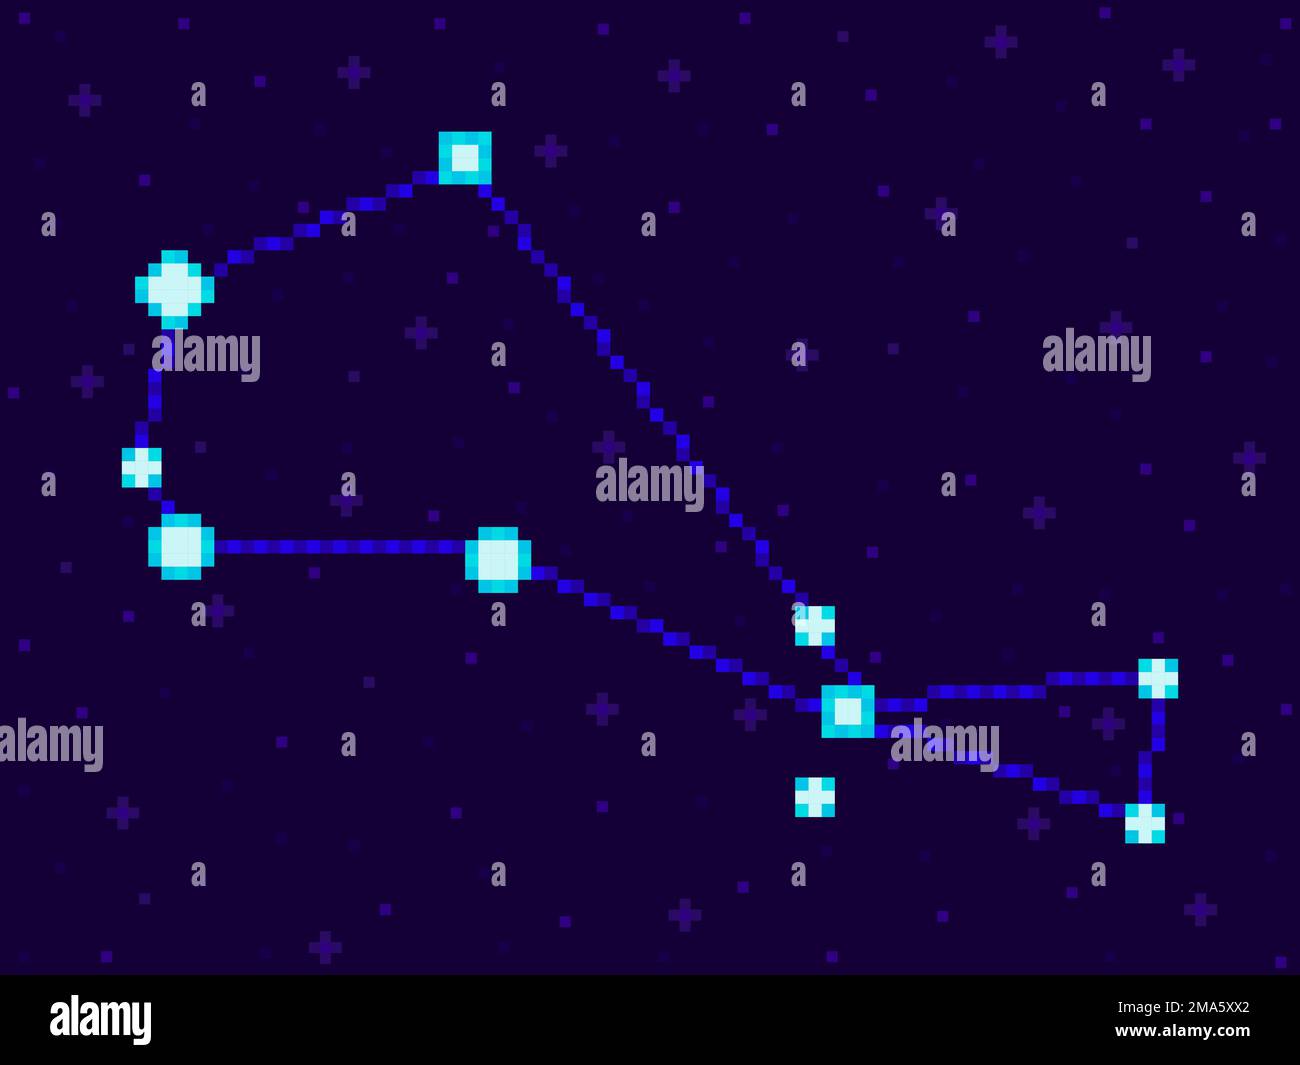 Piscis Austrinus constellation in pixel art style. 8-bit stars in the night sky in retro video game style. Cluster of stars and galaxies. Design for a Stock Vector